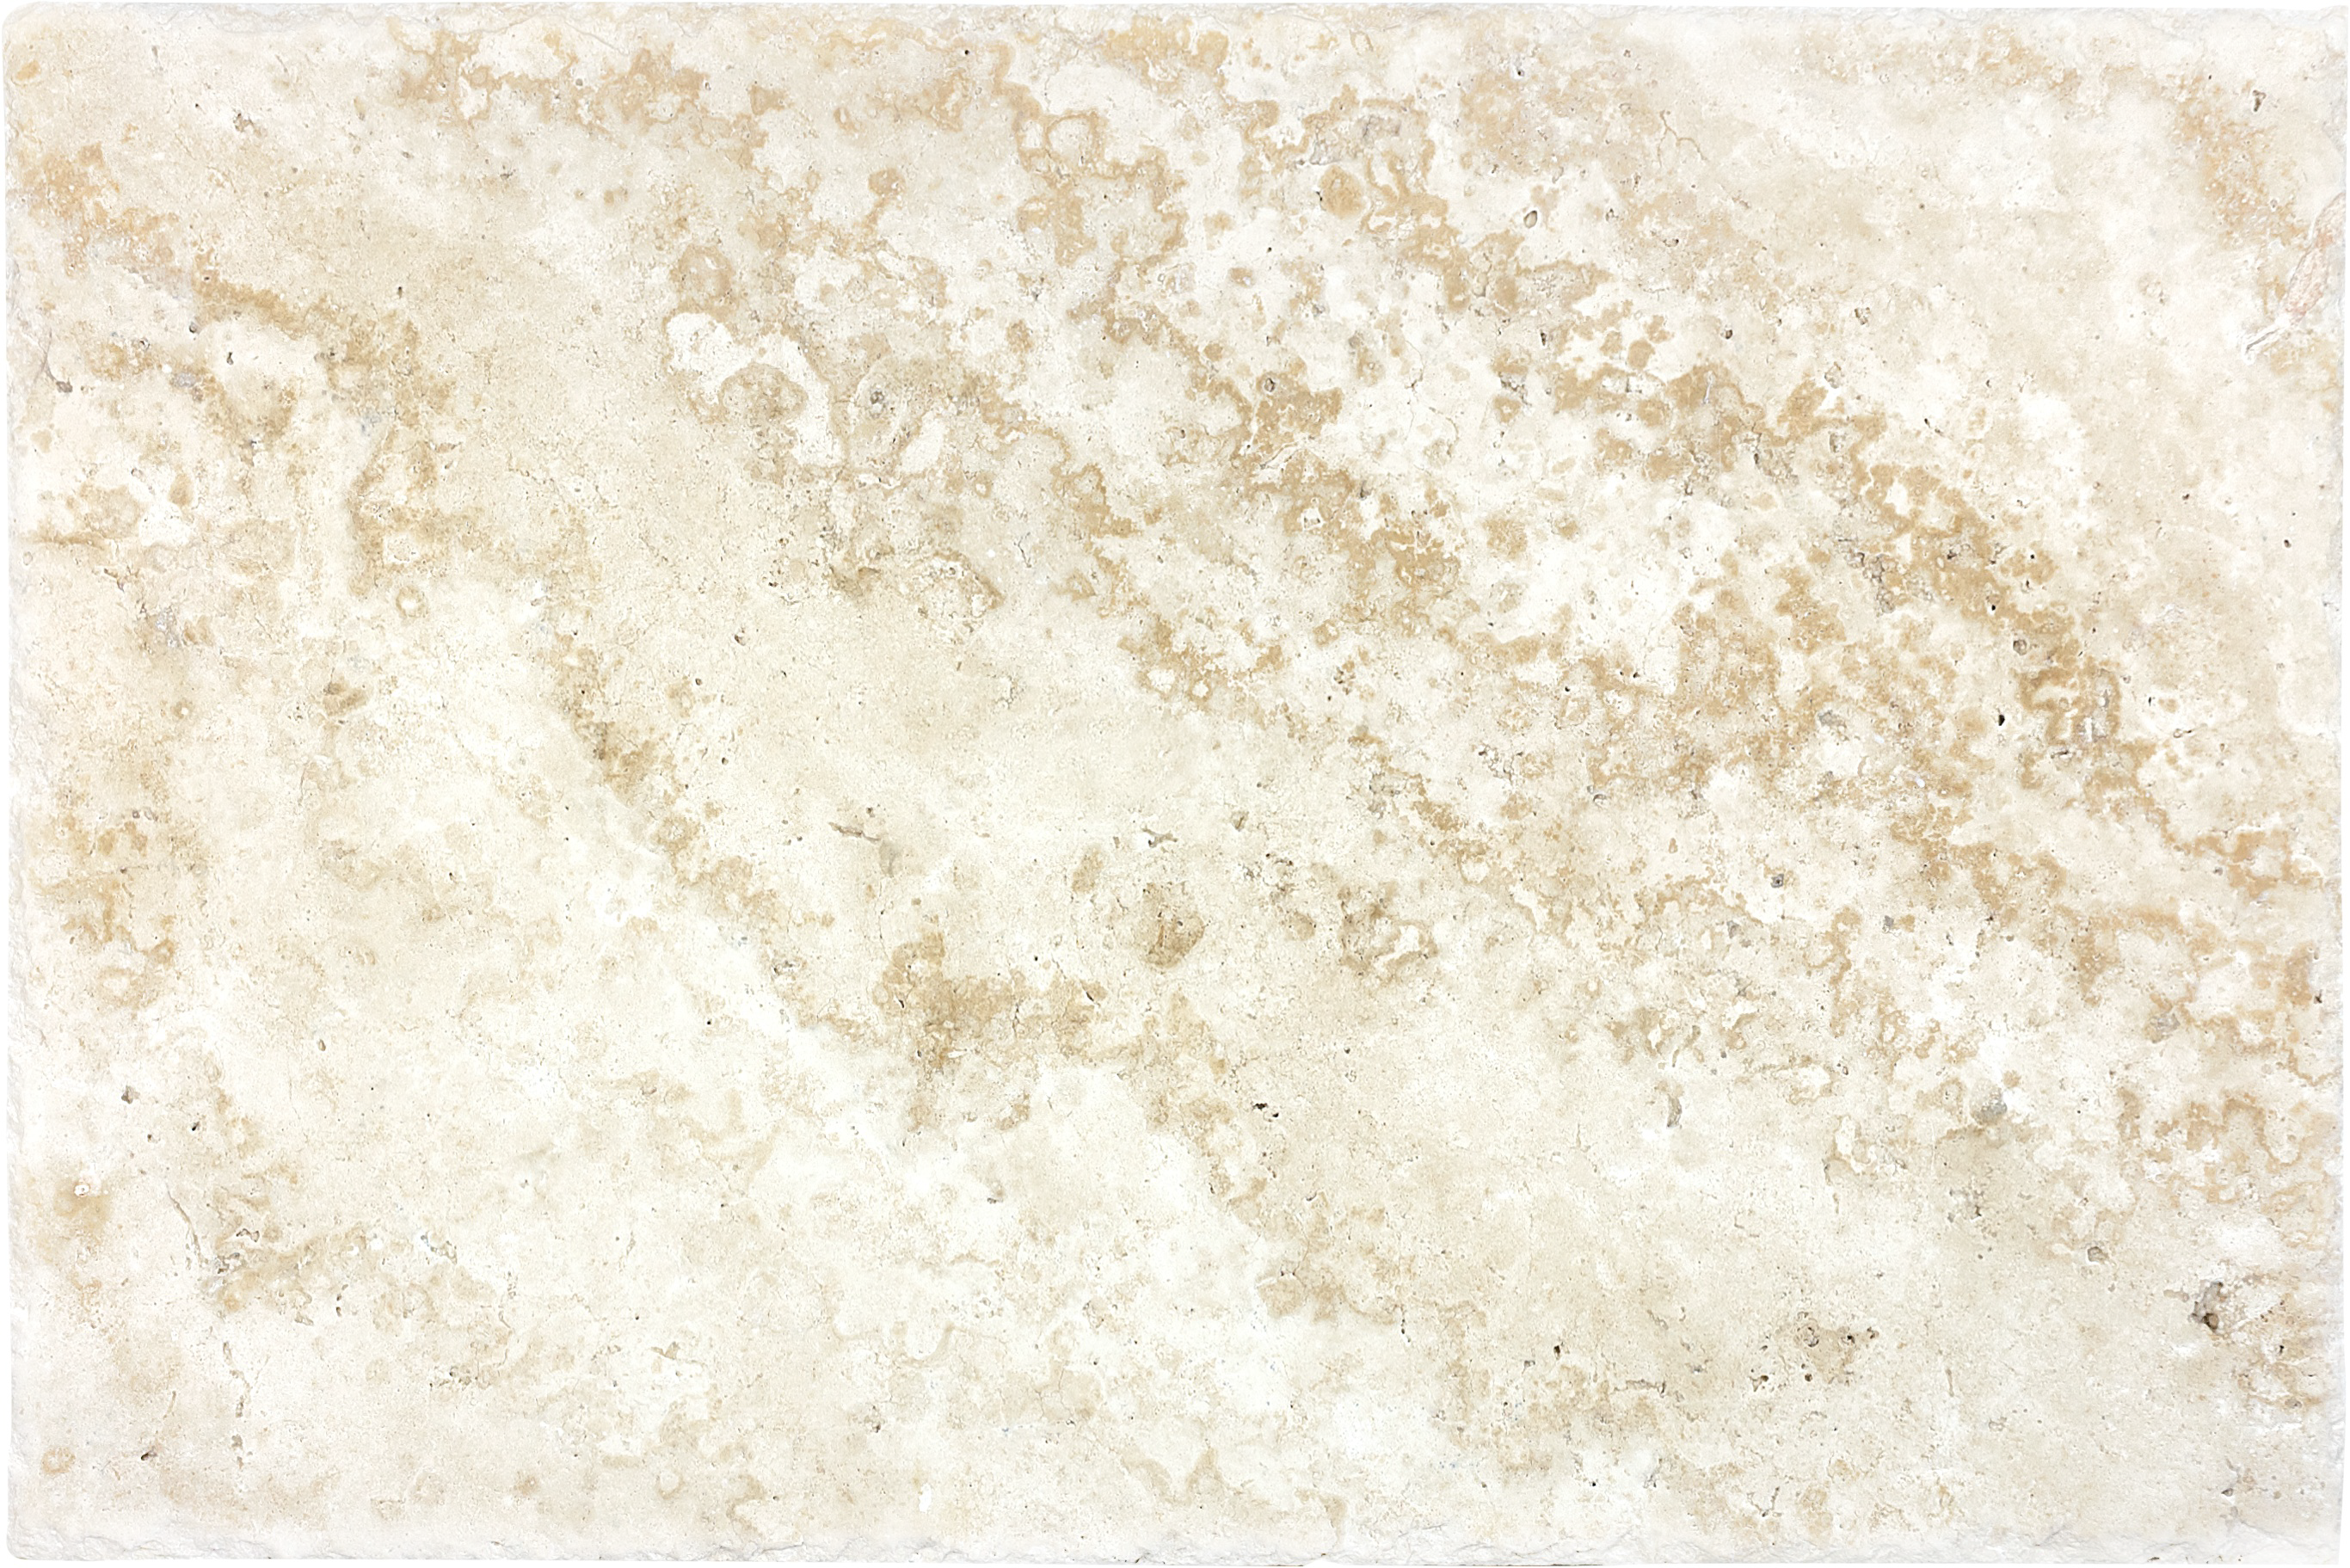 travertine pattern natural stone field tile from ivory anatolia collection distributed by surface group international brushed finish chiseled edge 16x24 rectangle shape